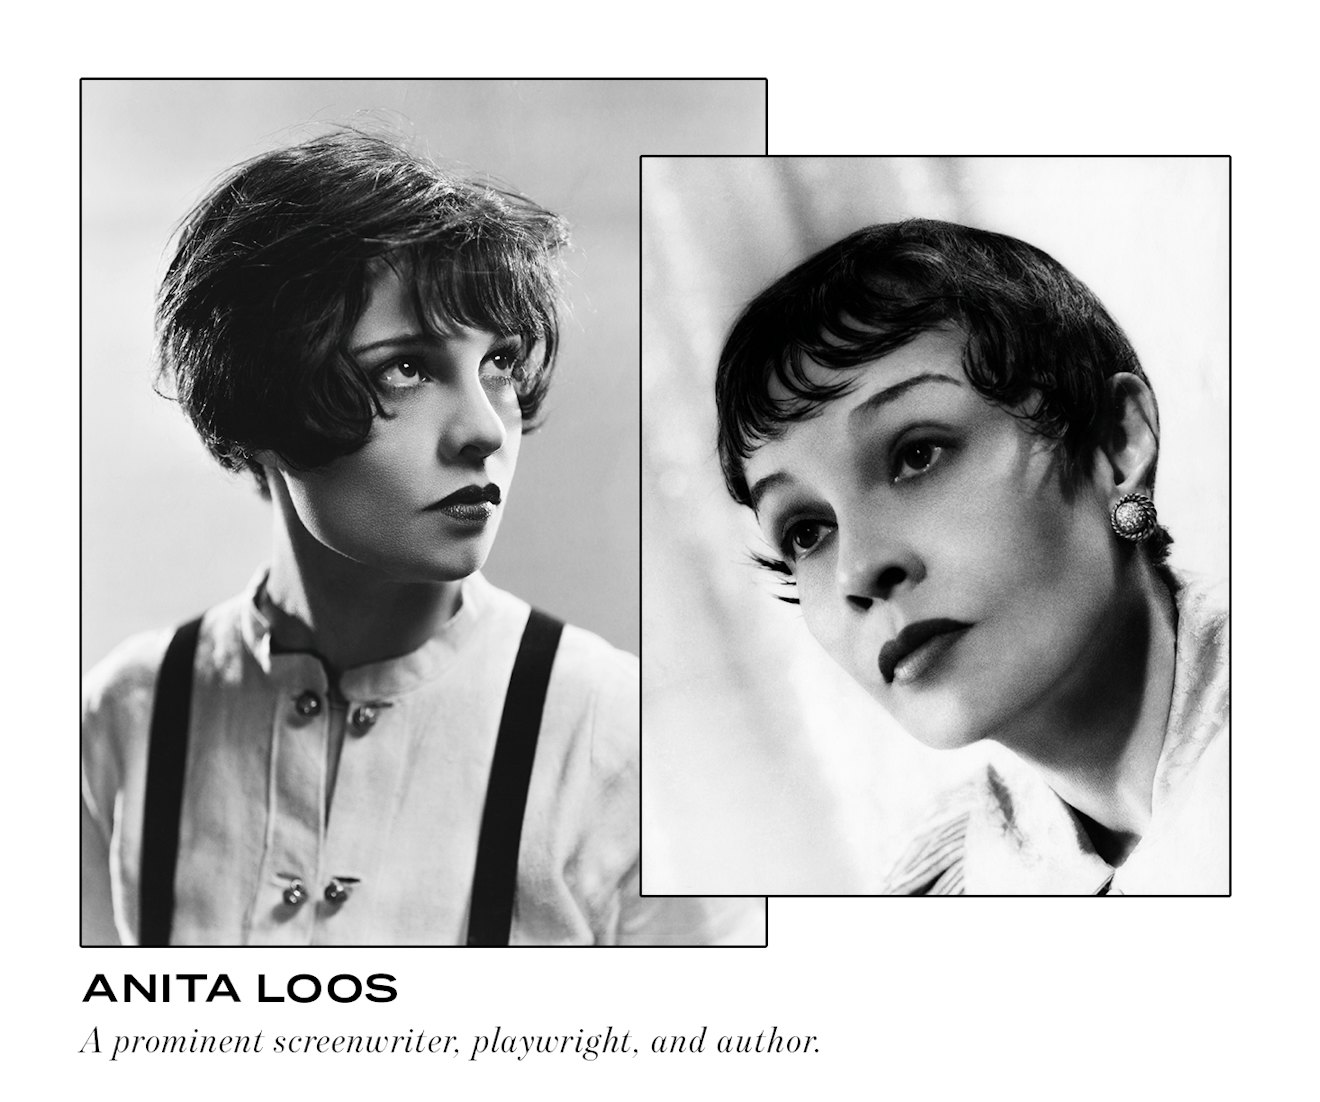 Anita Loos, a prominent screenwriter, playwright and author